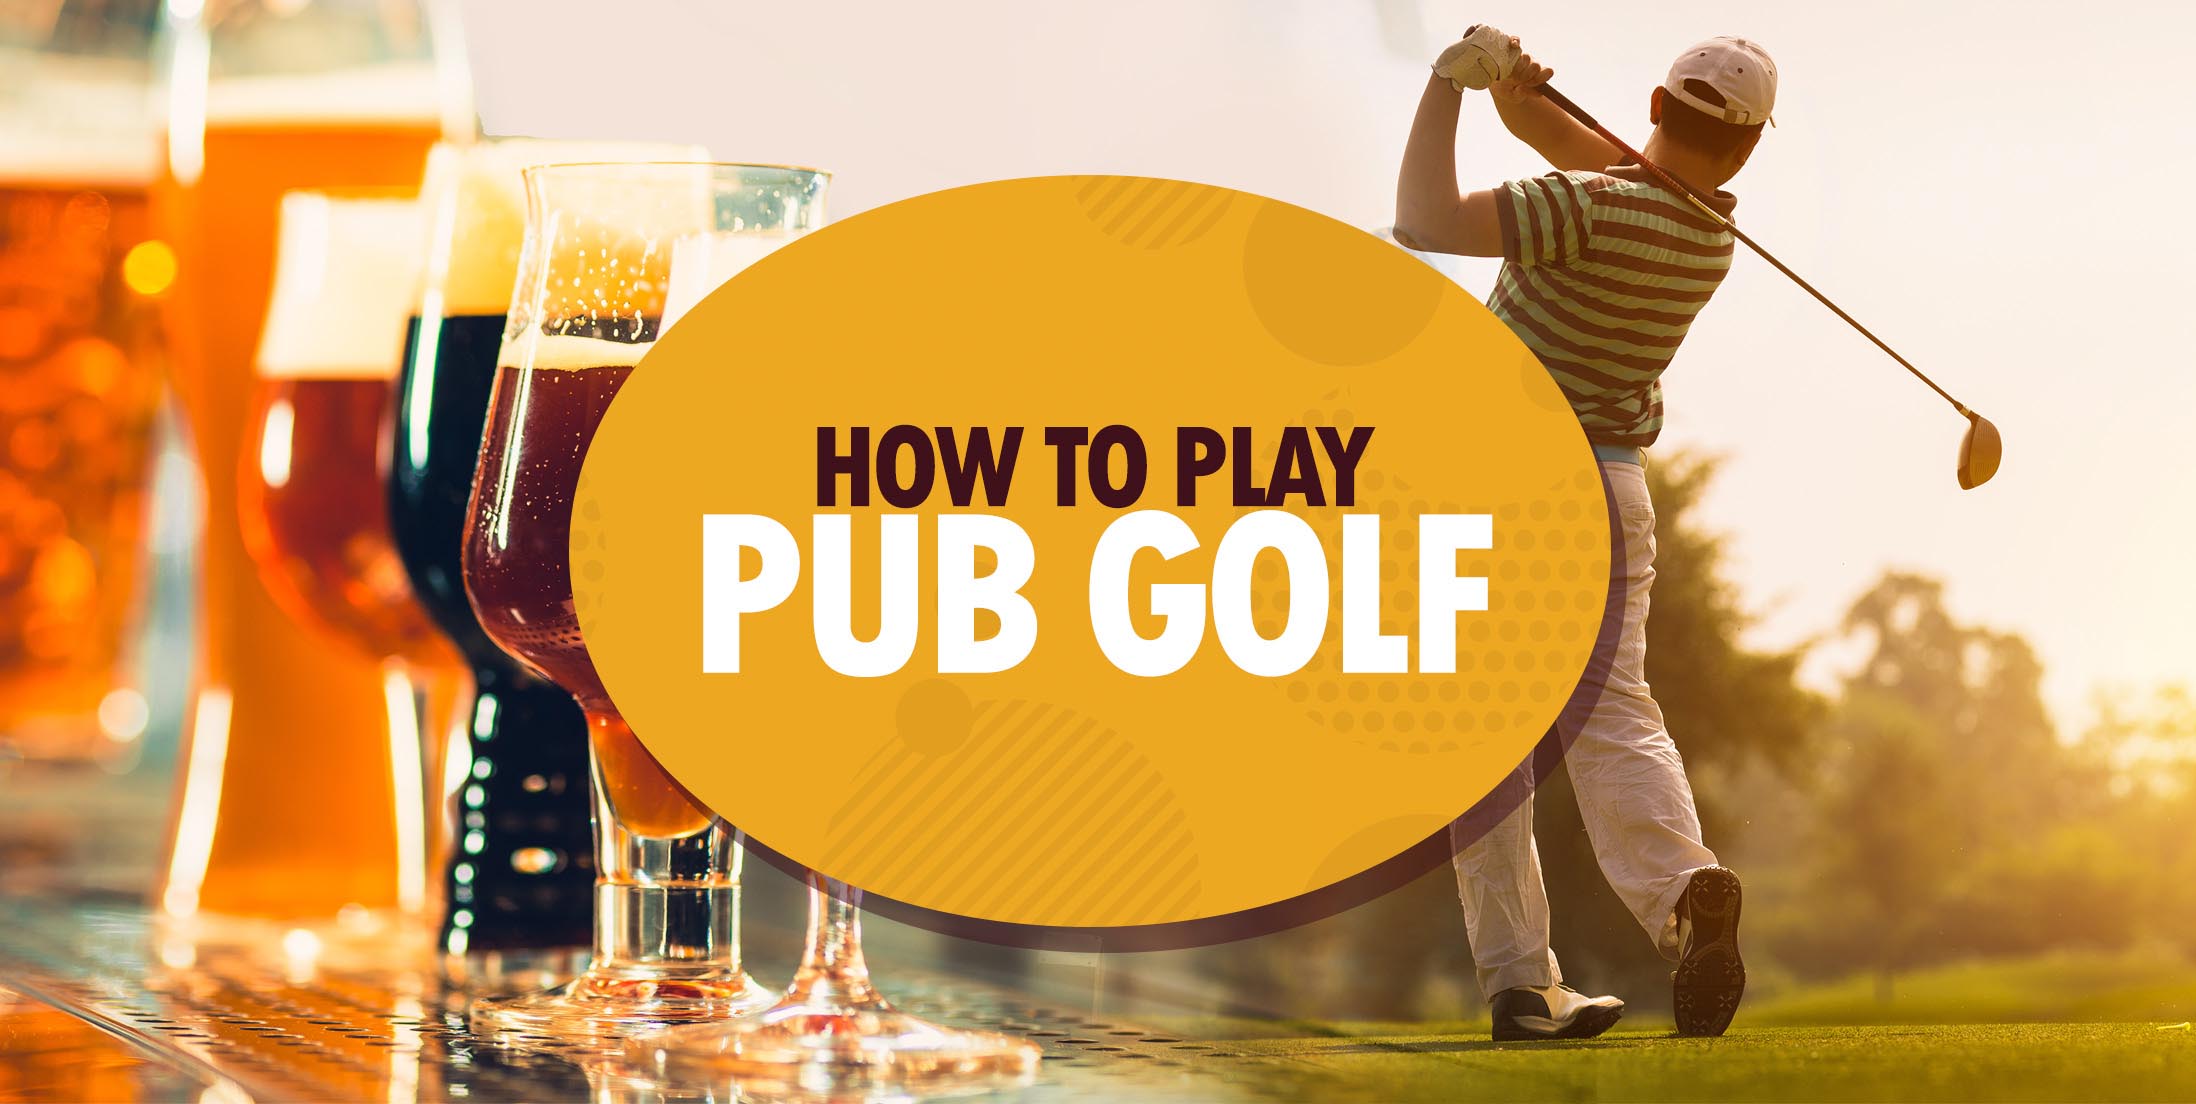 Fore! Cards: Drinks, On-Course Golf Game, Fun Interactive Golf Drinking  Game, Have More Fun On Your Next Round